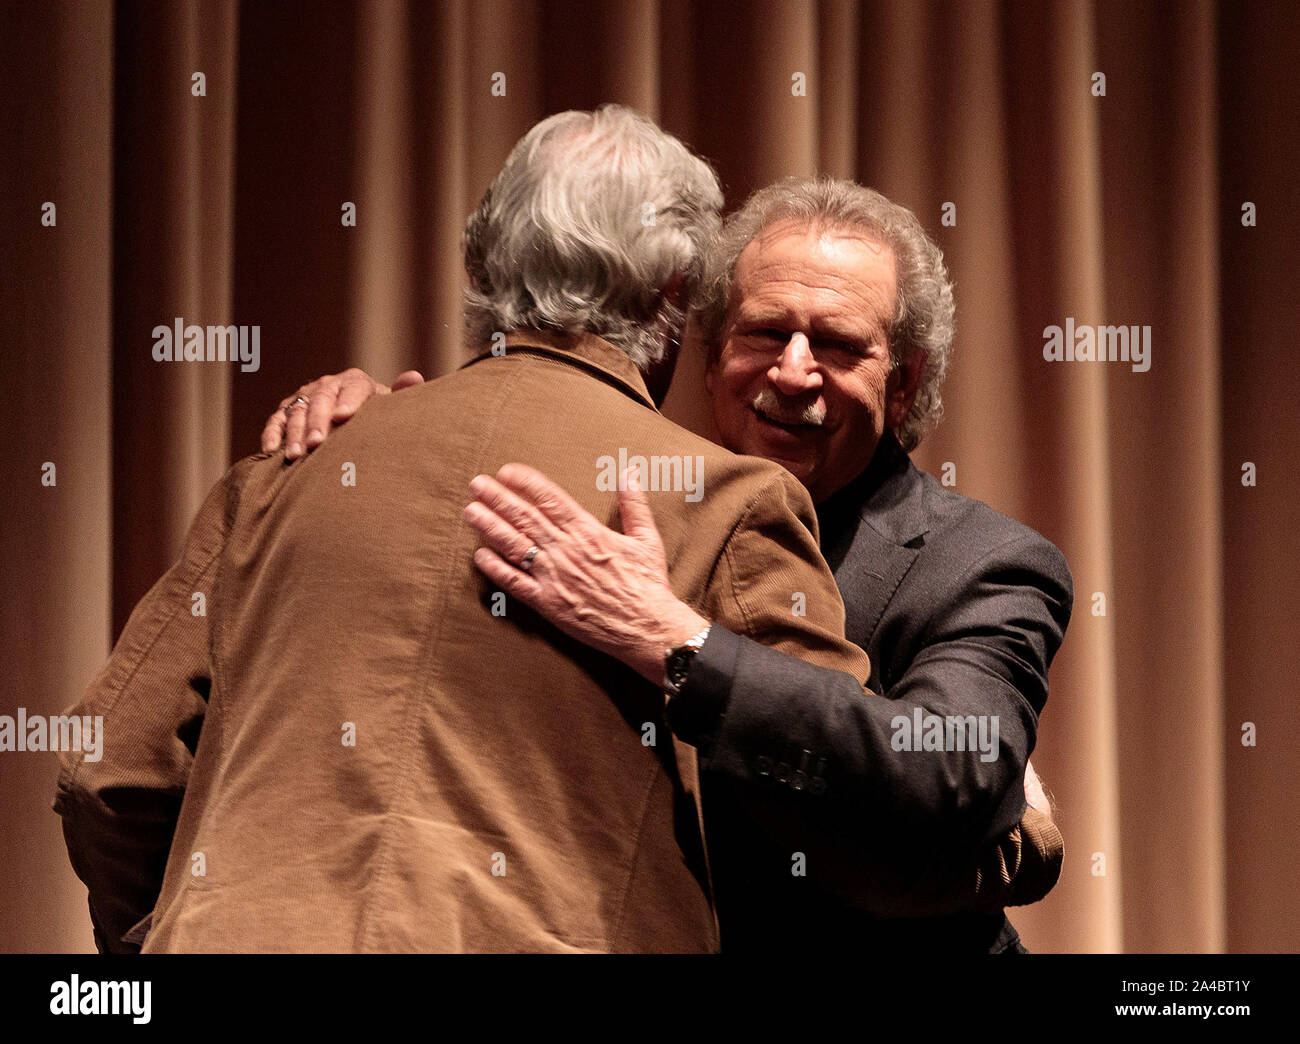 SAN RAFAEL, CA - OCTOBER 12: Phillip Kaufman and Mark Fishkin speaks onstage during the 42nd Mill Valley Film Festival - 'The Unbearable Lightness of Being' Premiere Screening at the Christopher B. Smith Rafael Film Center on October 12, 2019 in San Rafael, California. Photo: Michael Pegram/imageSPACE for the Mill Valley Film Festival/MediaPunch Stock Photo